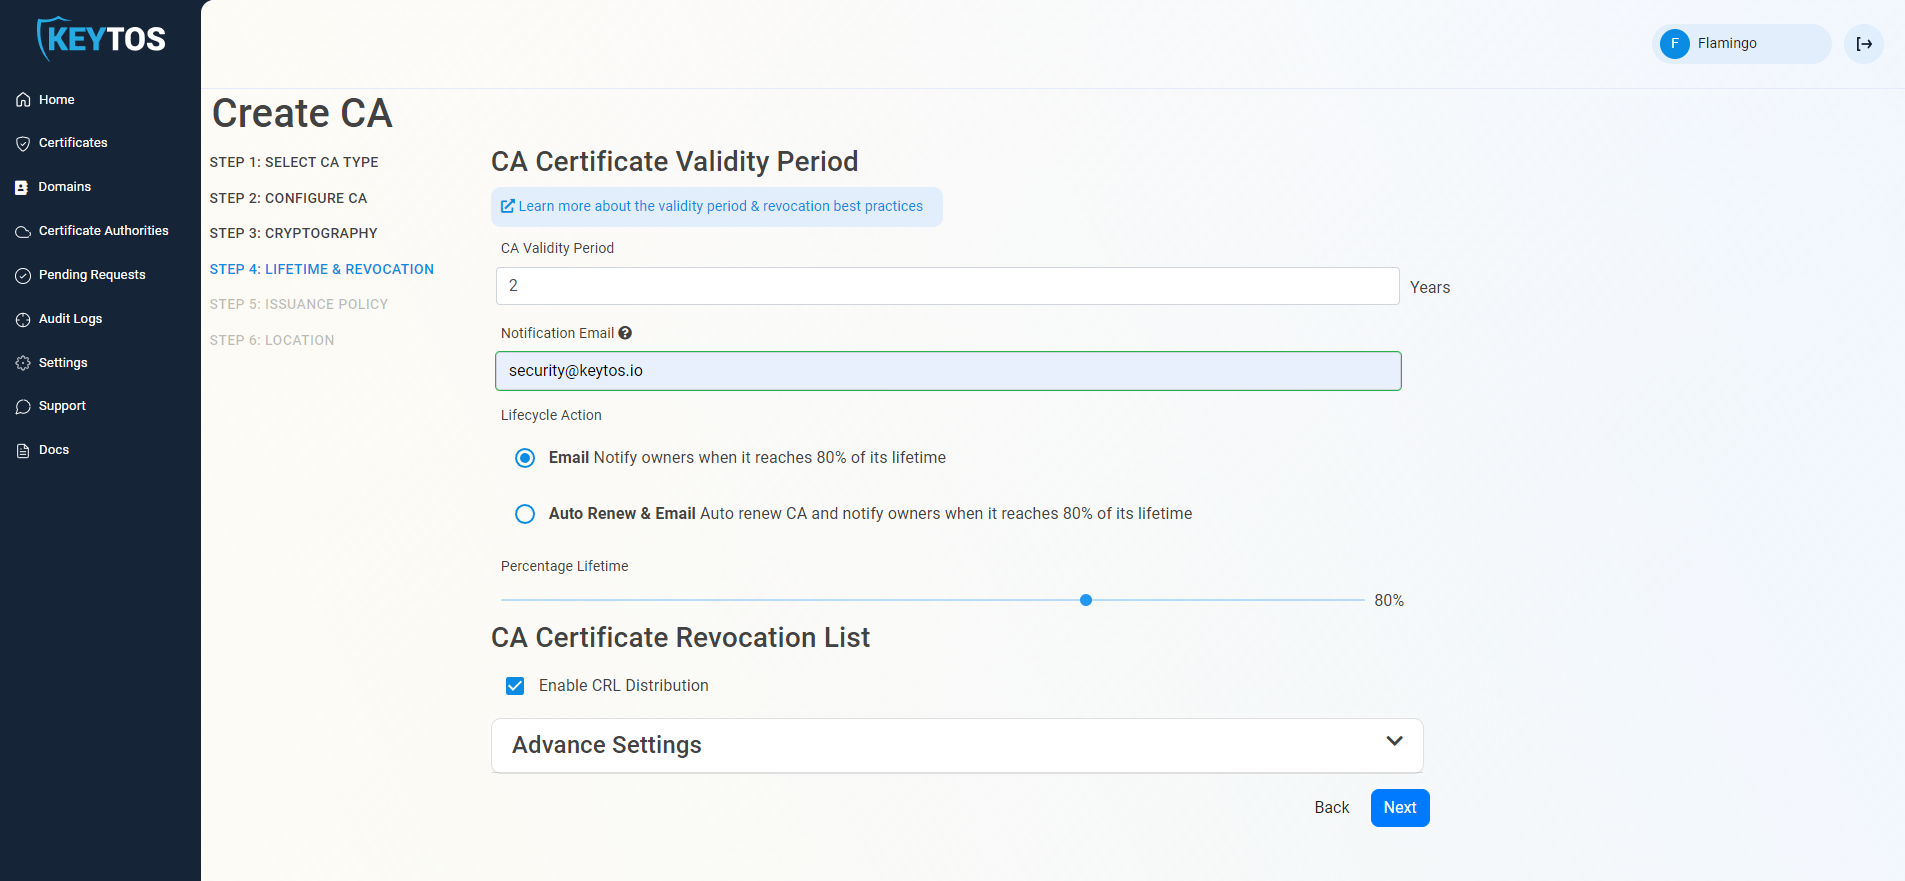 Certificate Authority Lifecycle Details